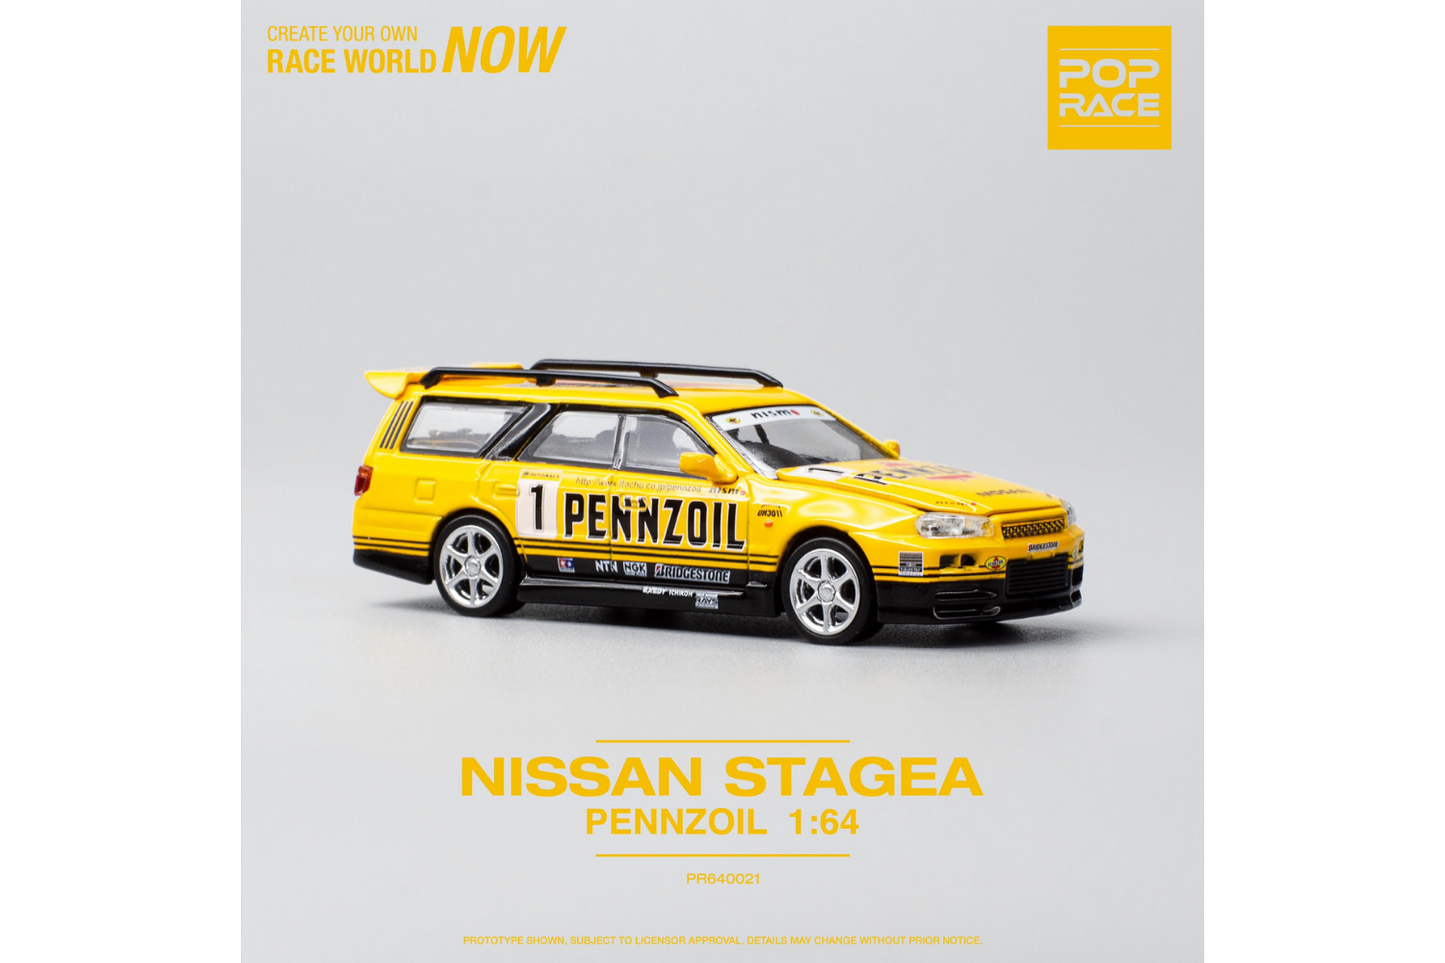 Pop Race 1/64 Nissan Stagea GT-R (R34) Wagon in Pennzoil Yellow Livery